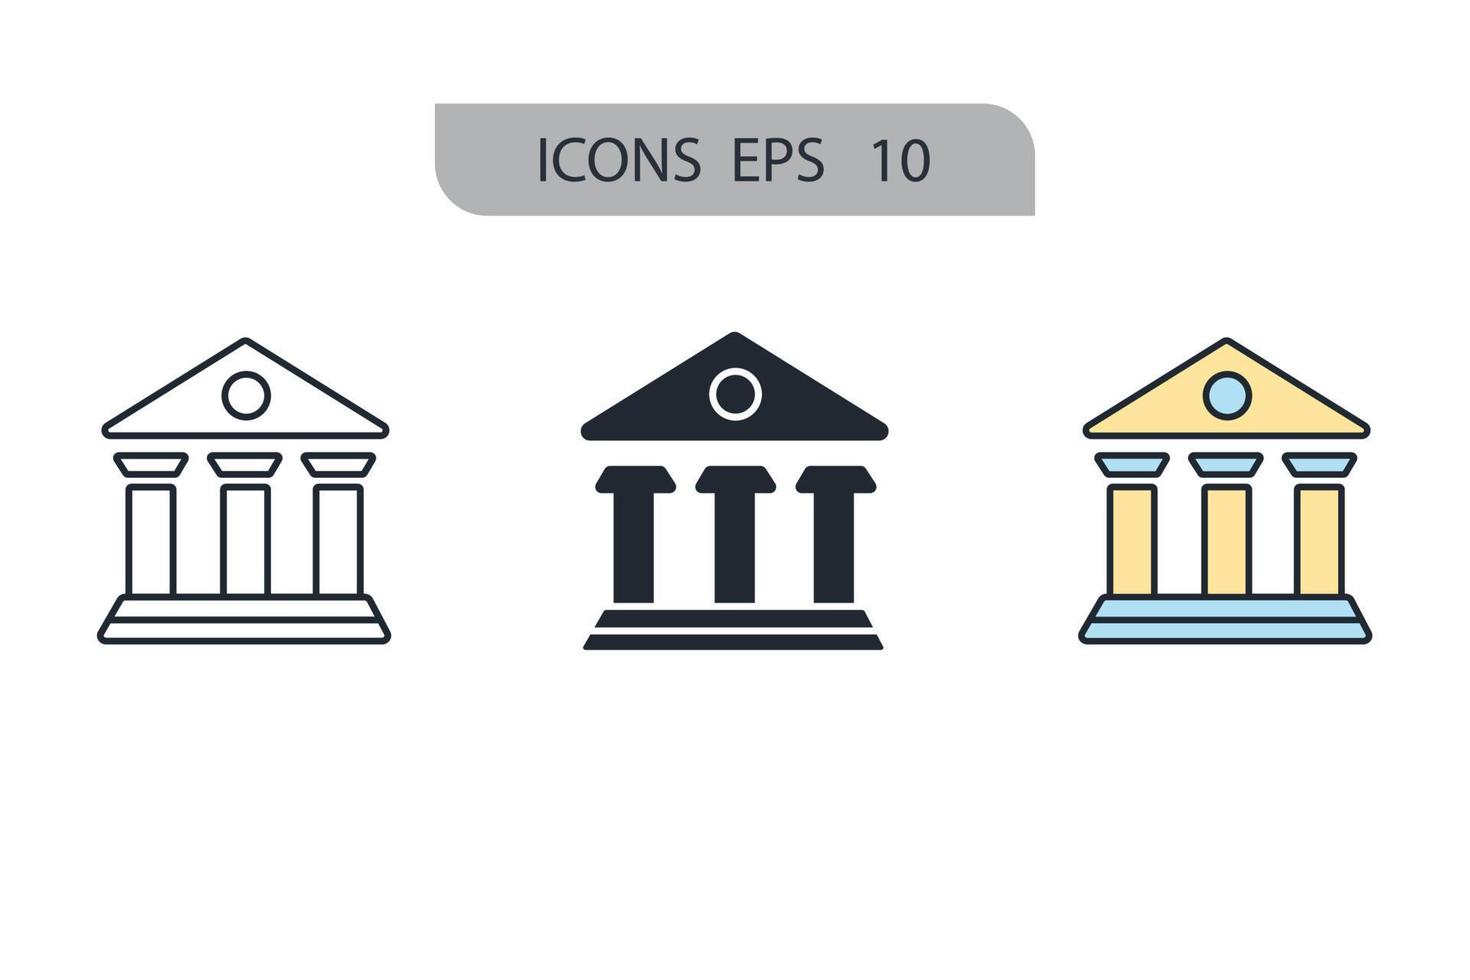 Justice icons symbol vector elements for infographic web